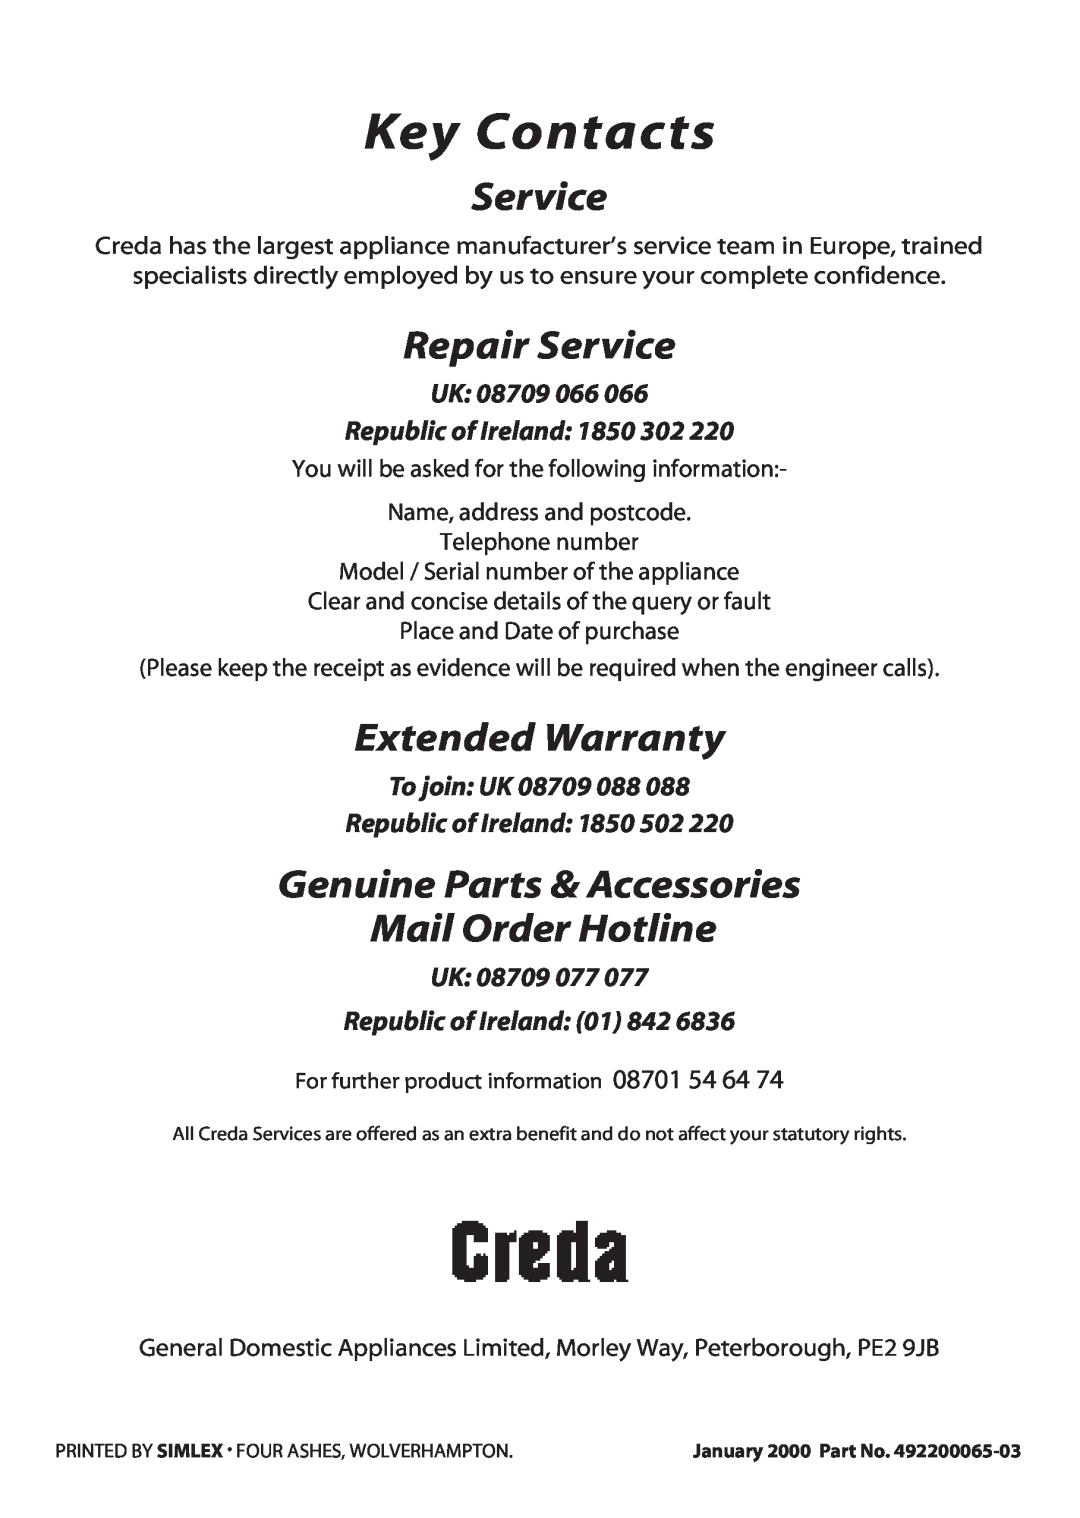 Creda H150E manual Key Contacts, Repair Service, Extended Warranty, Genuine Parts & Accessories Mail Order Hotline 